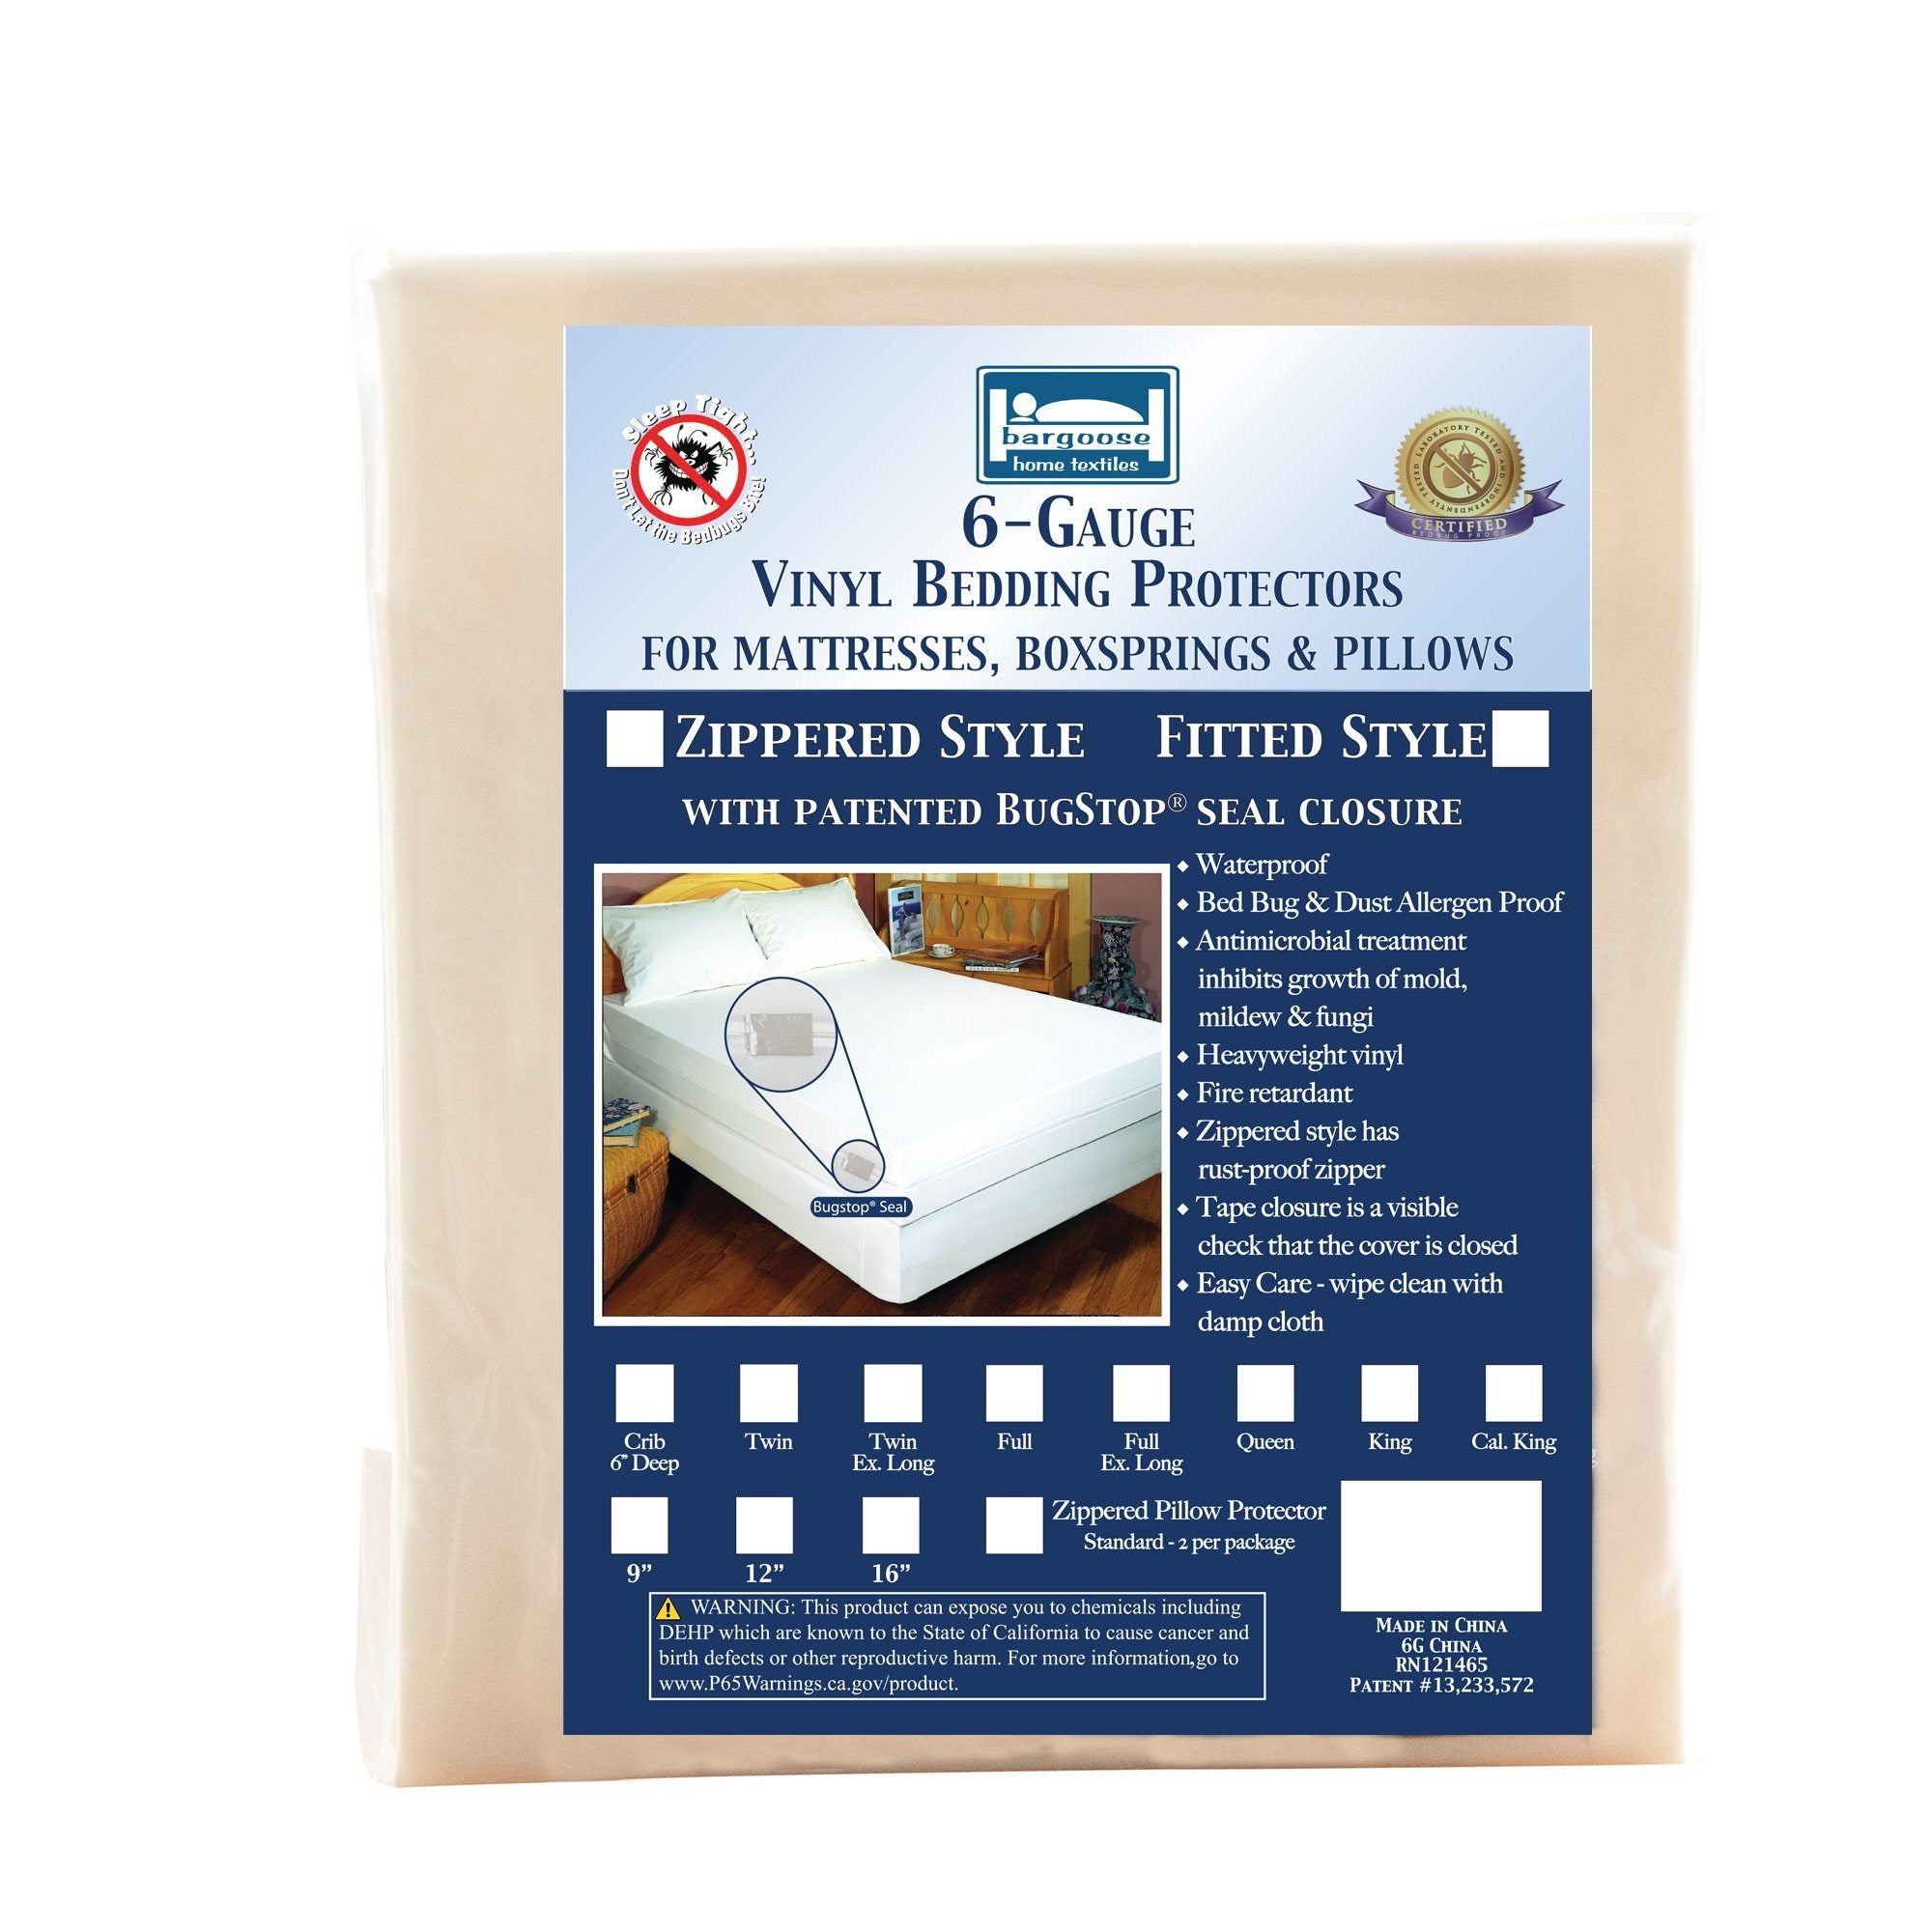 Bargoose’s Vinyl Zippered Pillow Protector - The BedBug Solution™ for Your Pillows - Packed in Pairs Pillow Protector Bargoose Home Textiles, Inc. 